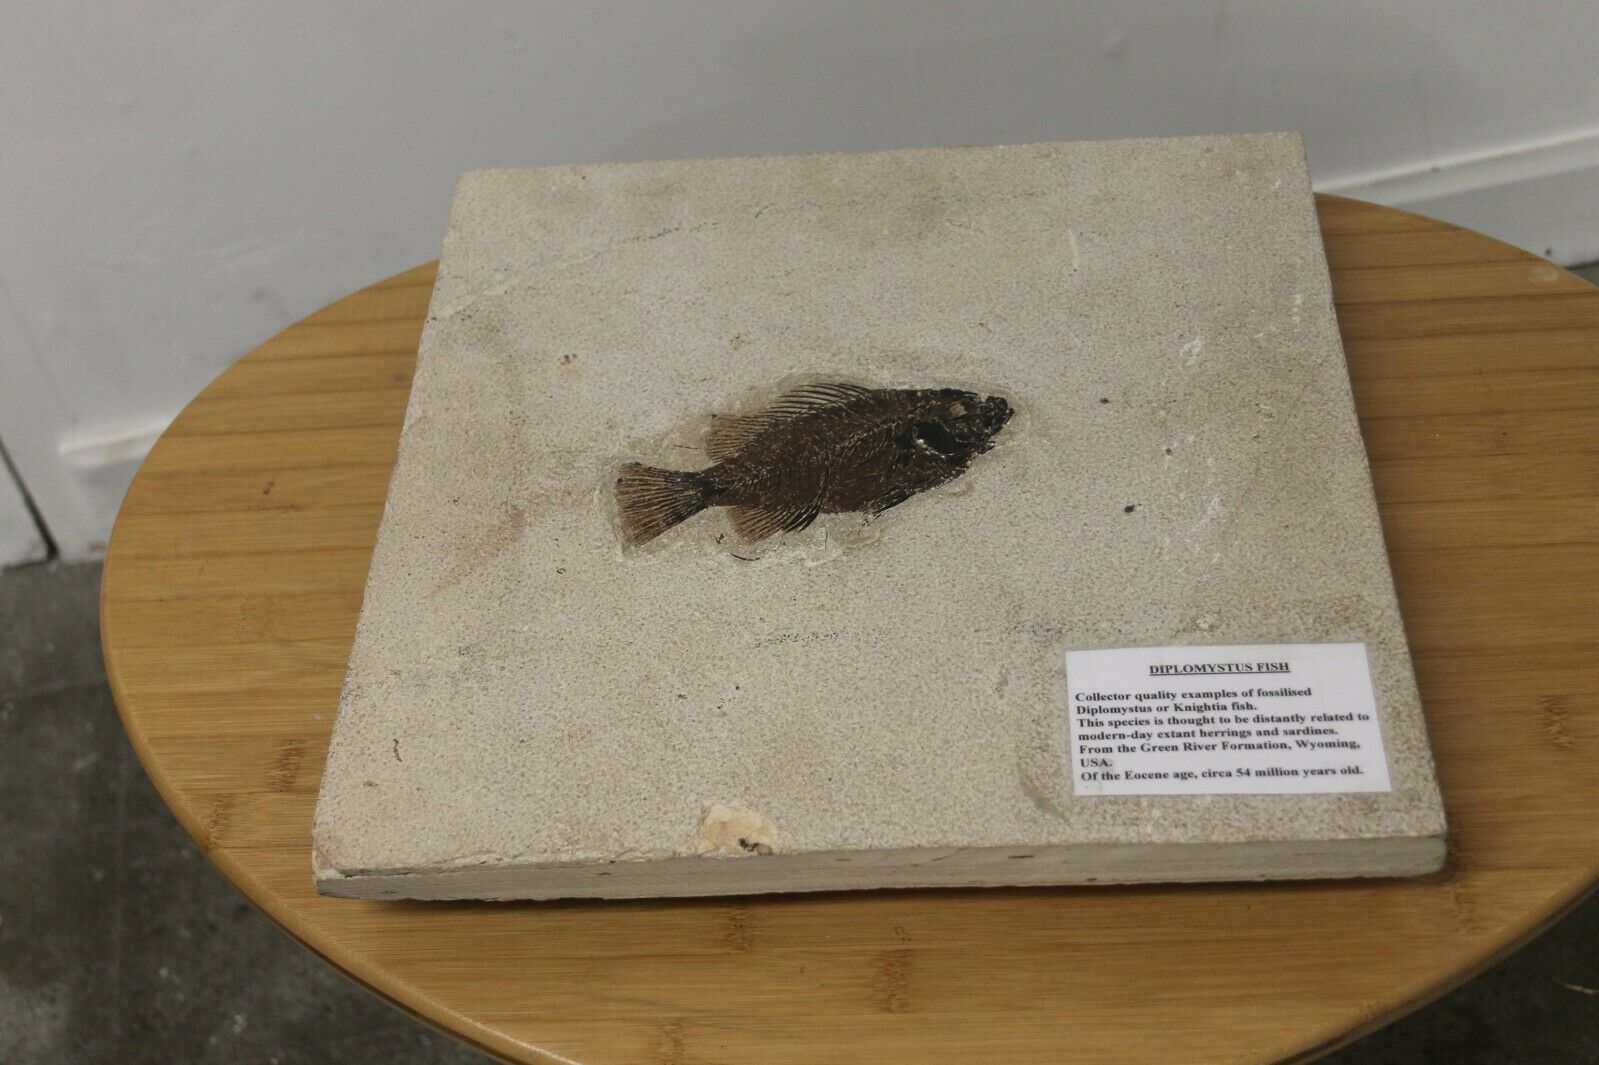 54 million years old Large fossil fish diplomystus 13 by